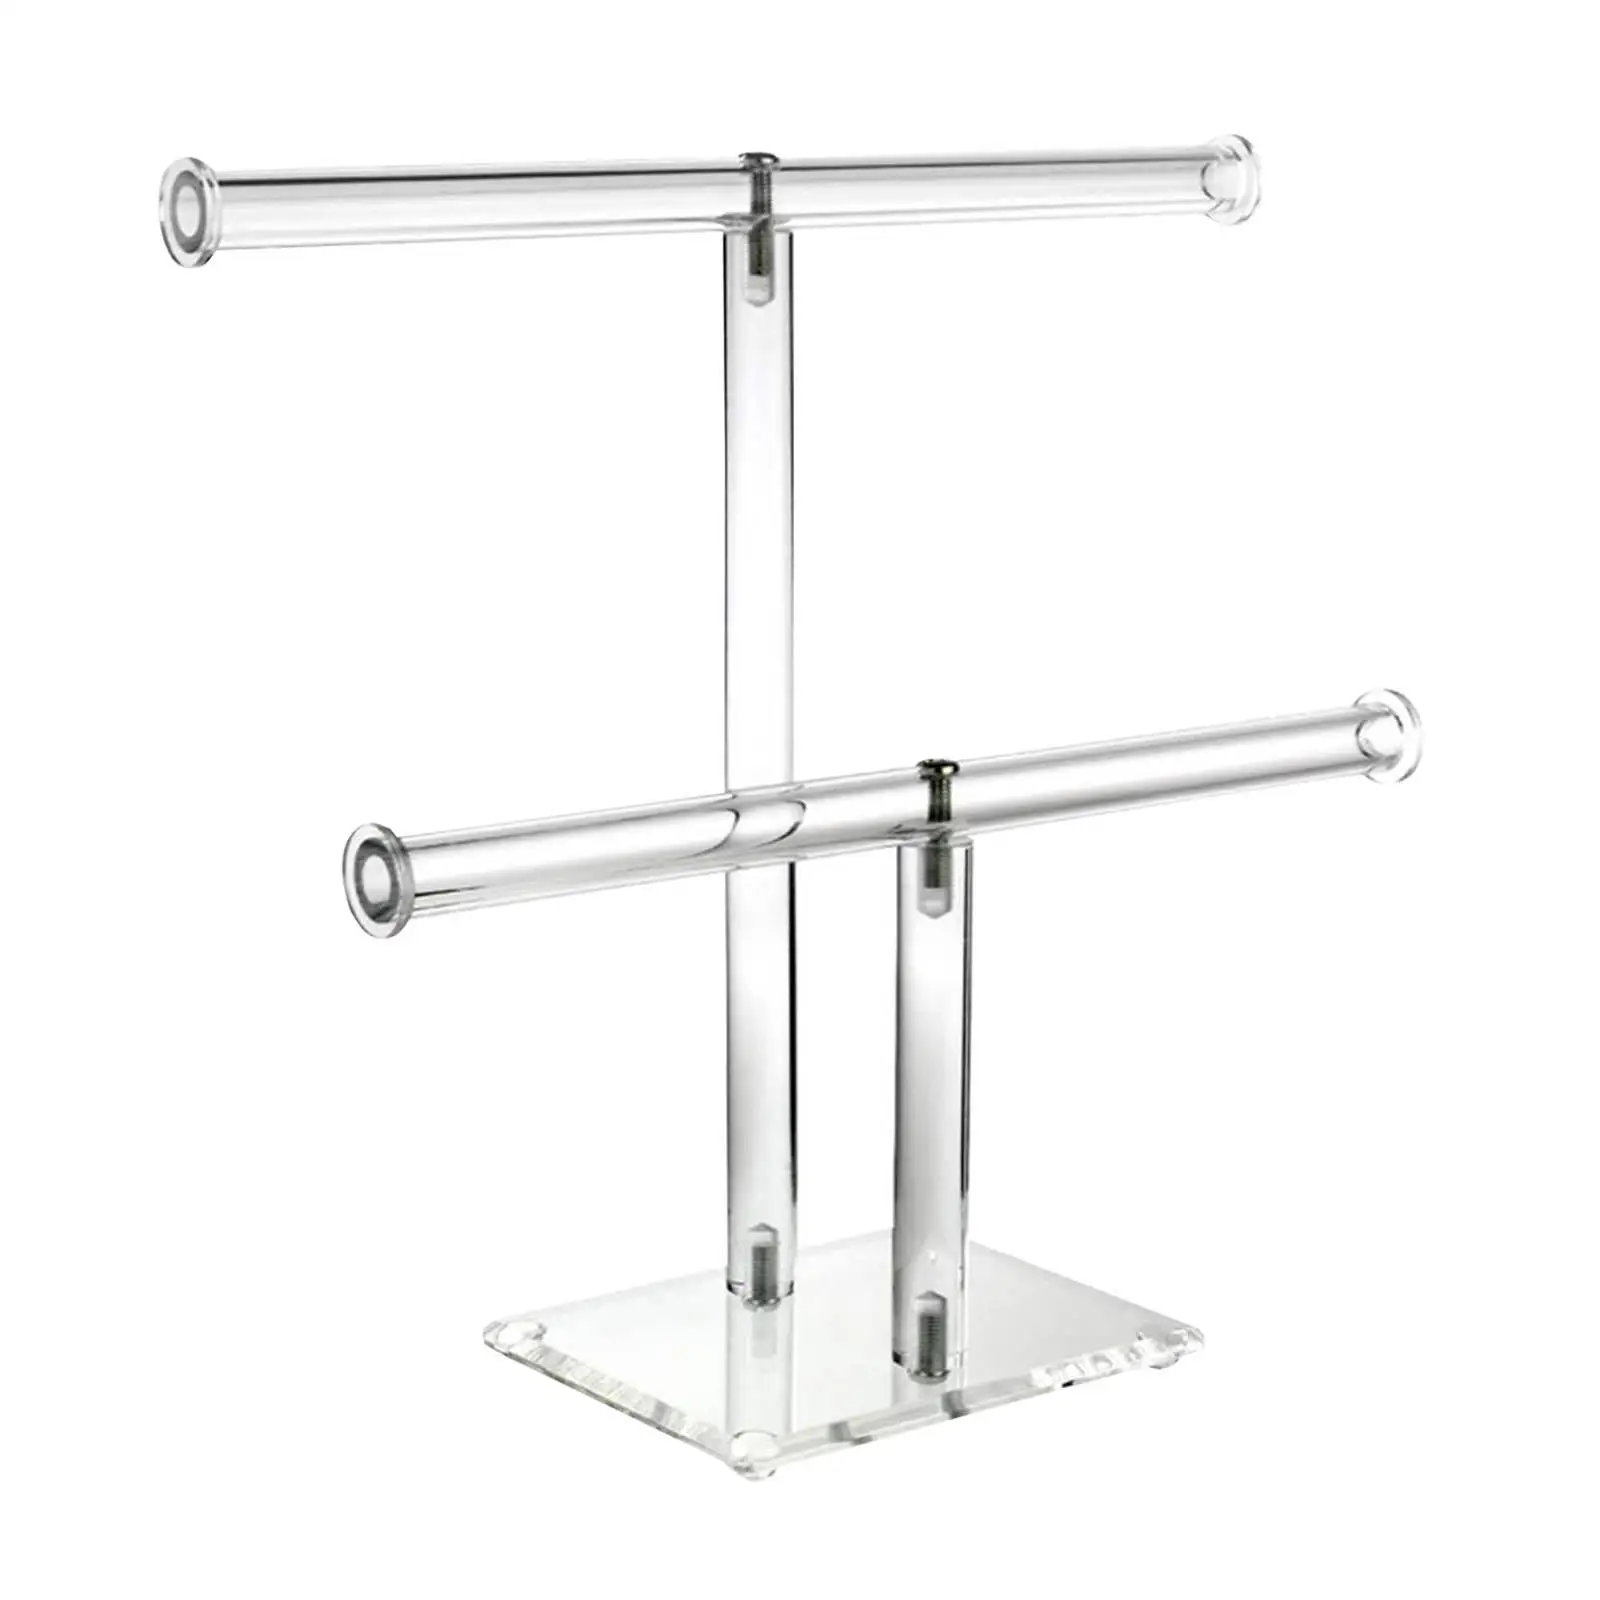 Jewelry Display Stand Holder Acrylic Clear Organizer for Earrings Necklaces Selling Retail